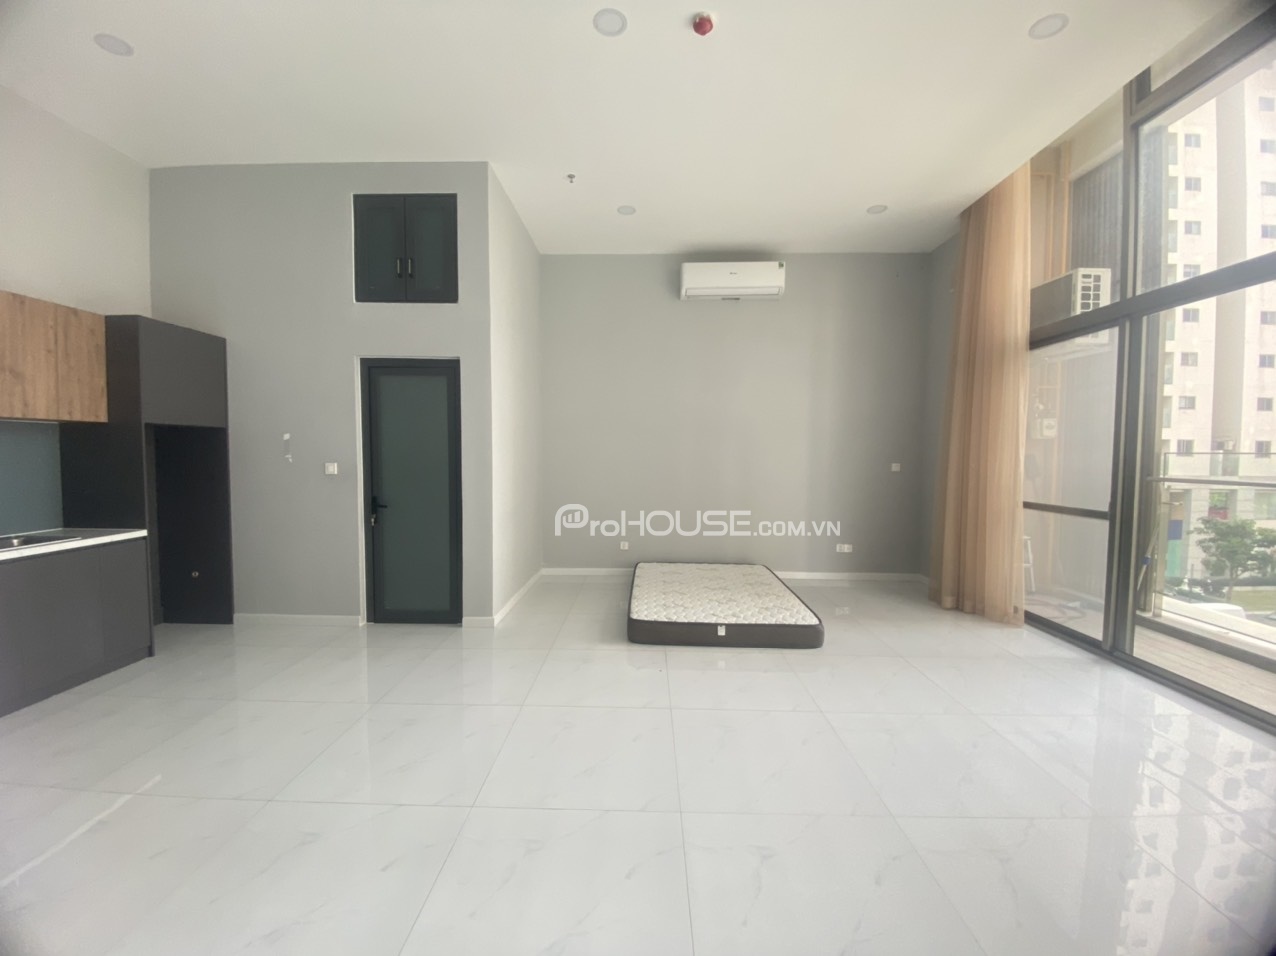 Shophouse for rent in Midtown Phu My Hung with cheap price